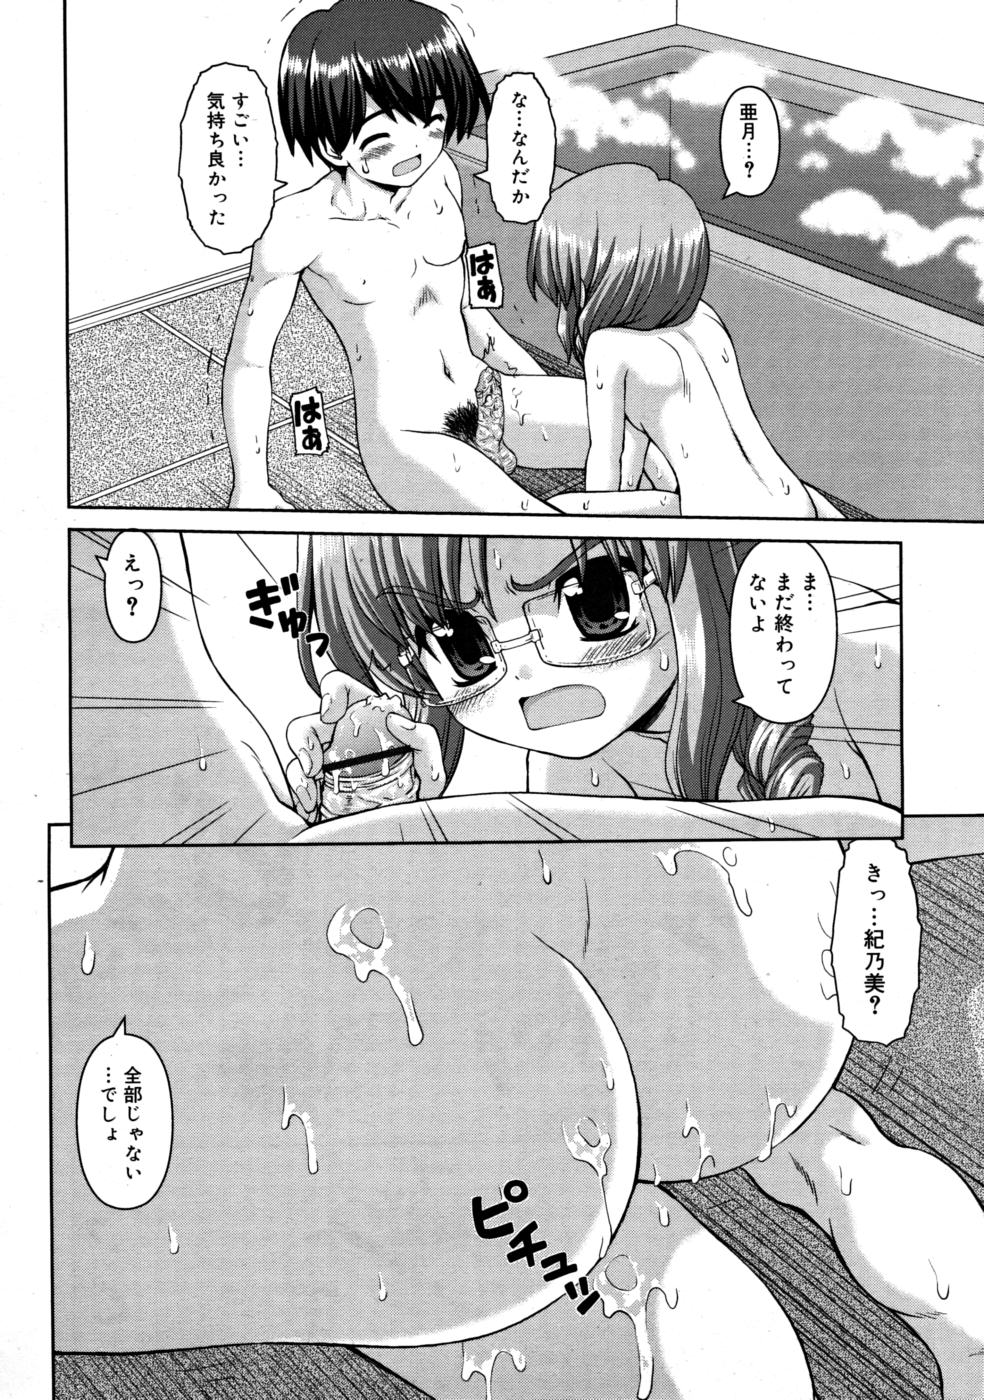 COMIC RiN 2008-03 page 38 full